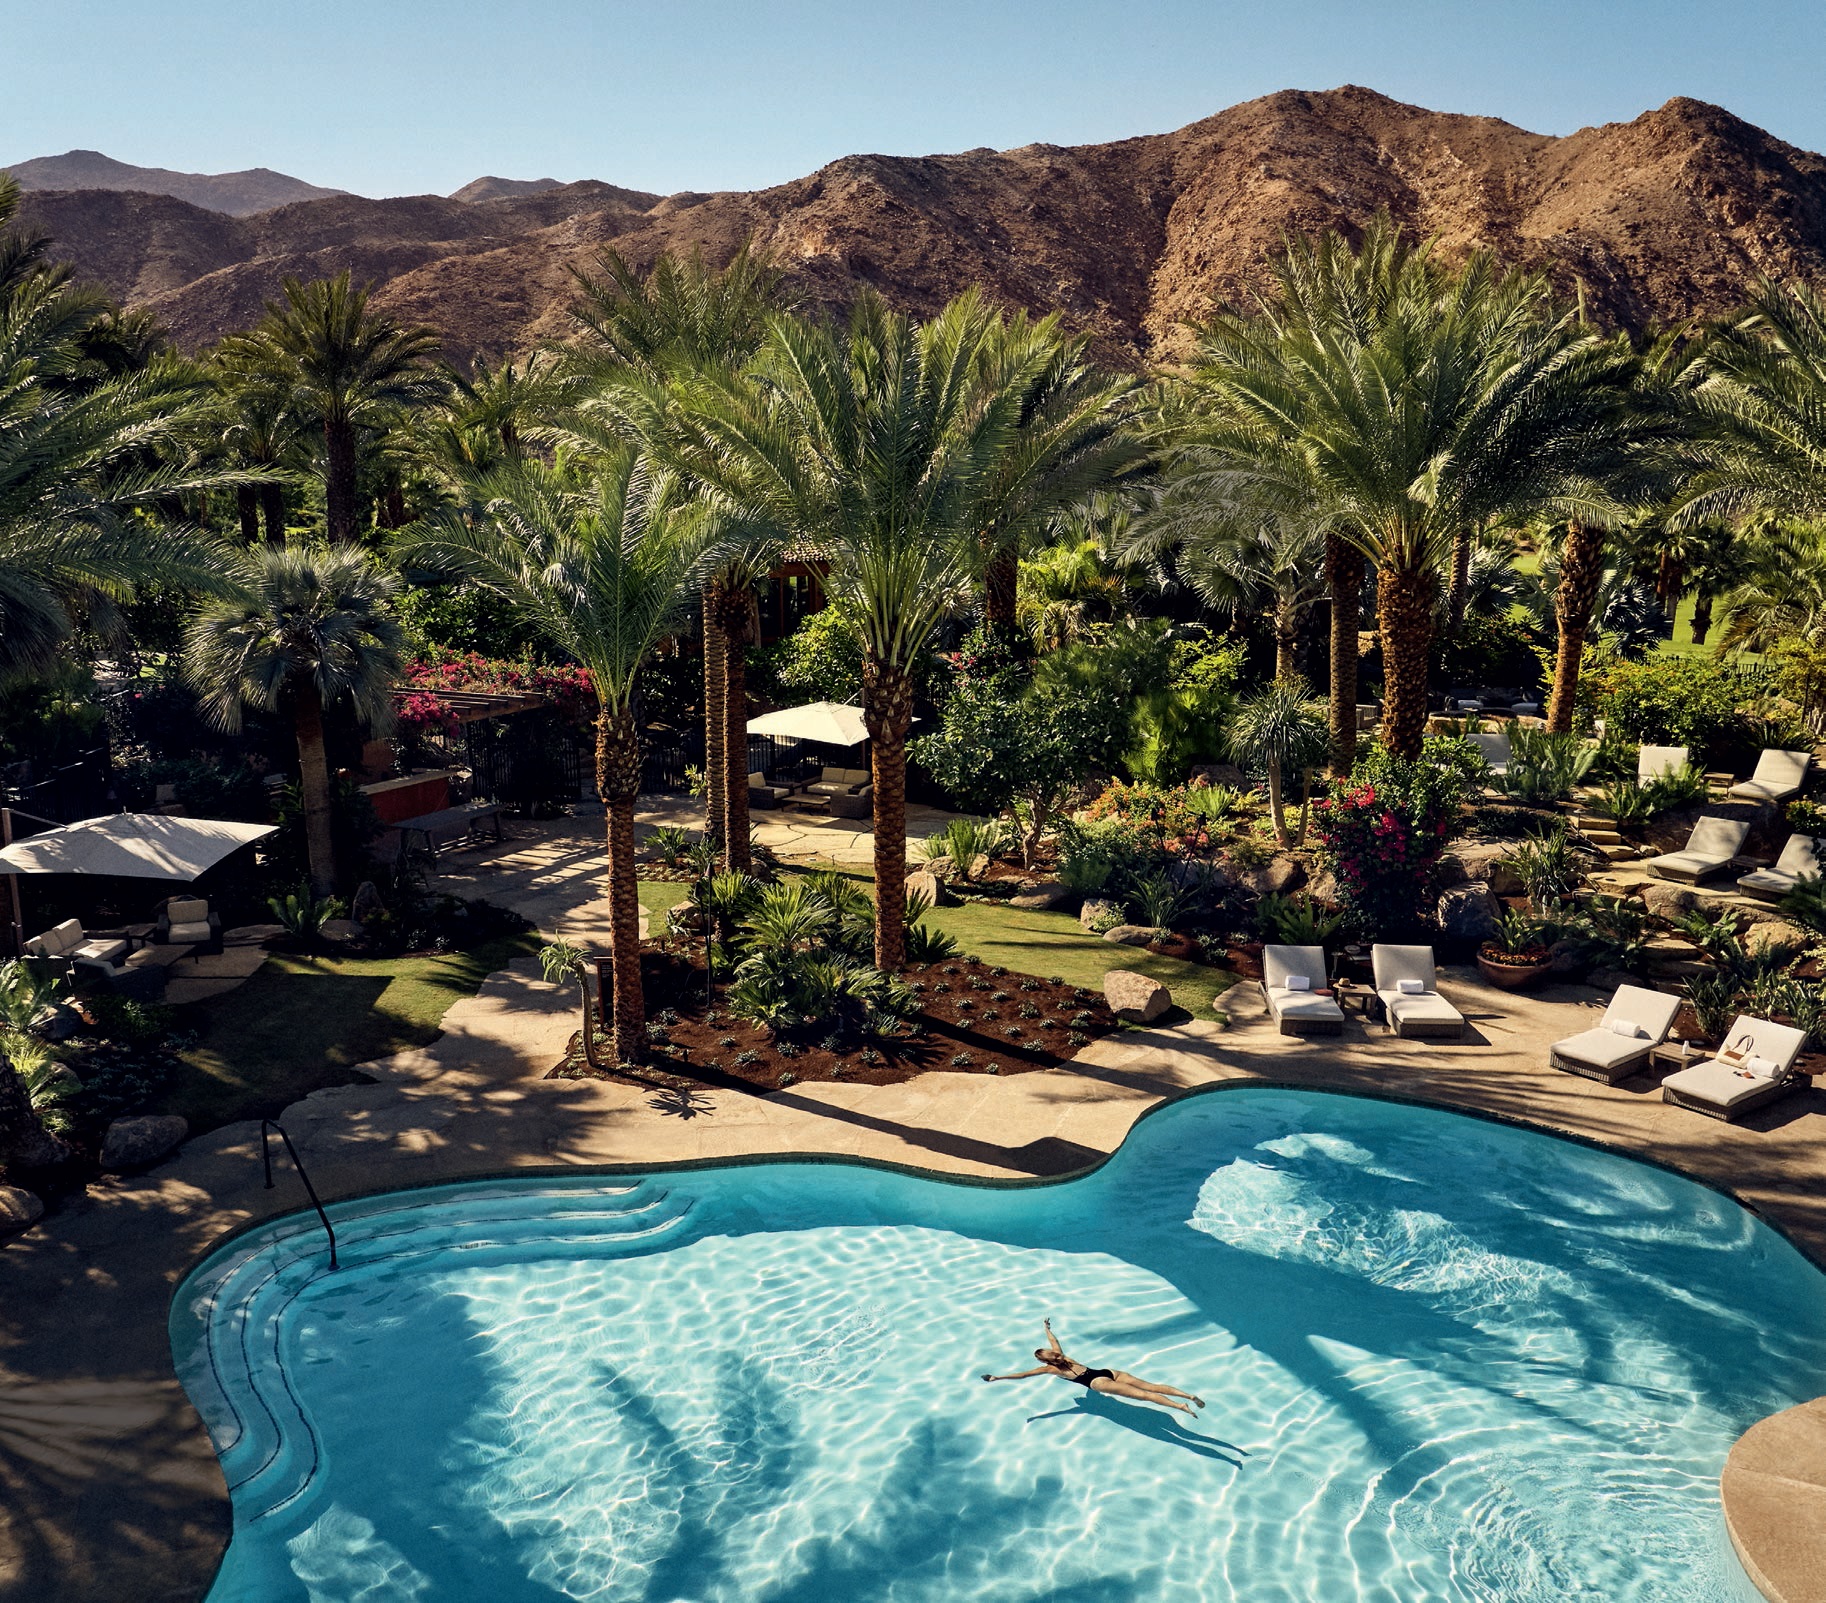 Located near Palm Springs in Rancho Mirage, Sensei Porcupine Creek boasts a stay-all-day pool and incredible views of the Santa Rosa Mountains PHOTO BY: CHRIS SIMPSON